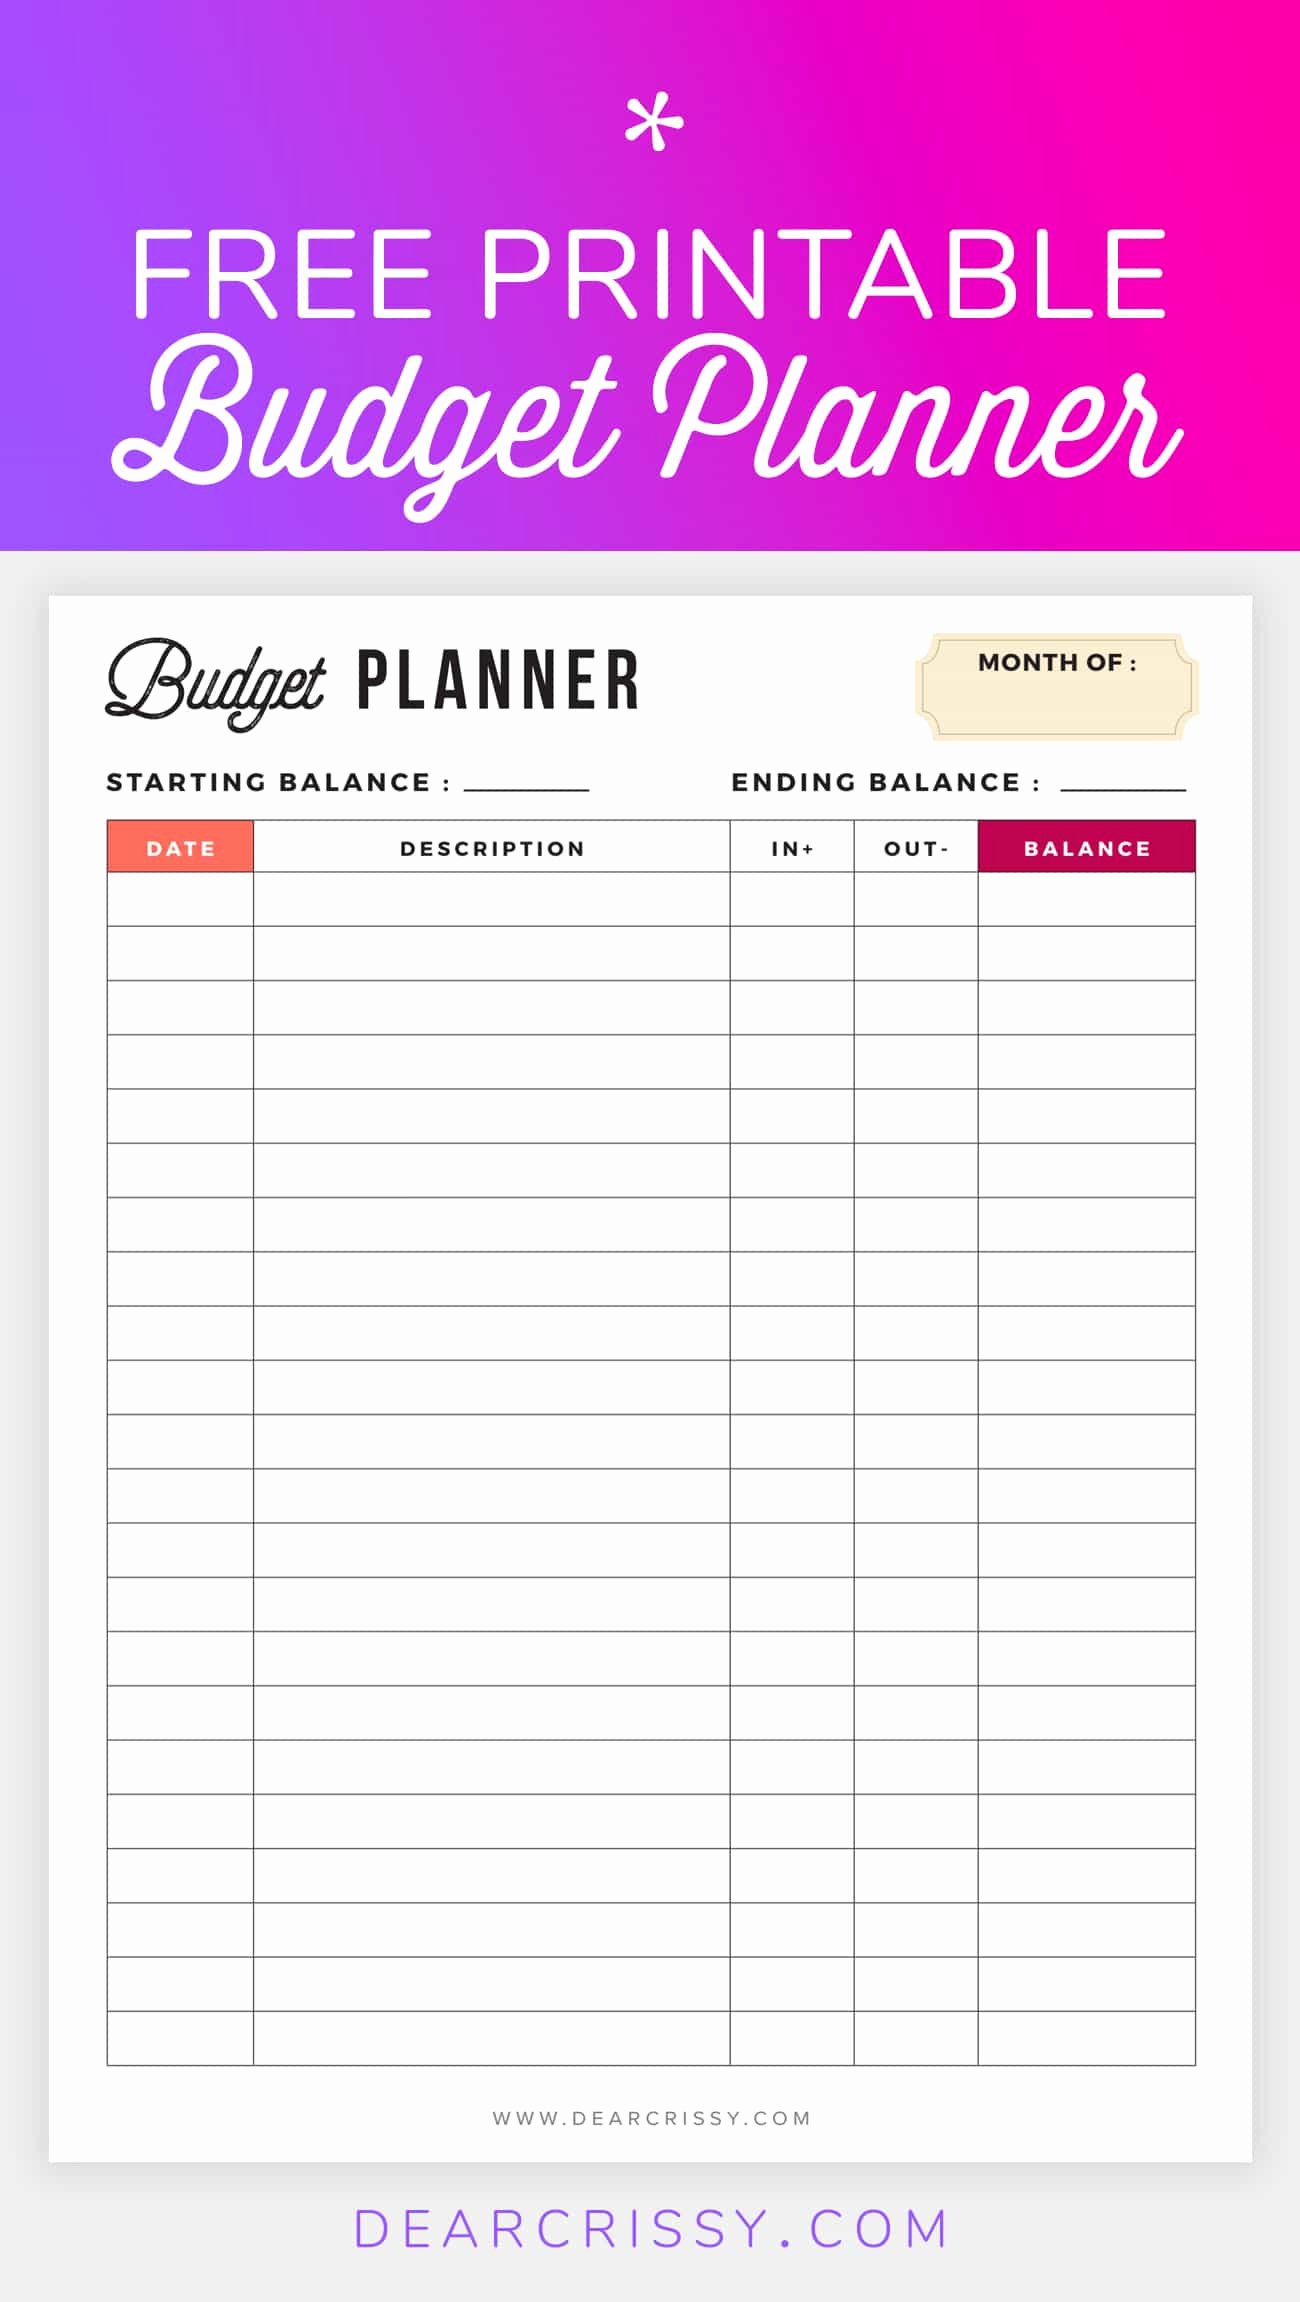 Monthly Budget Planner Template Lovely Free Bud Planner Printable Printable Finance Planner